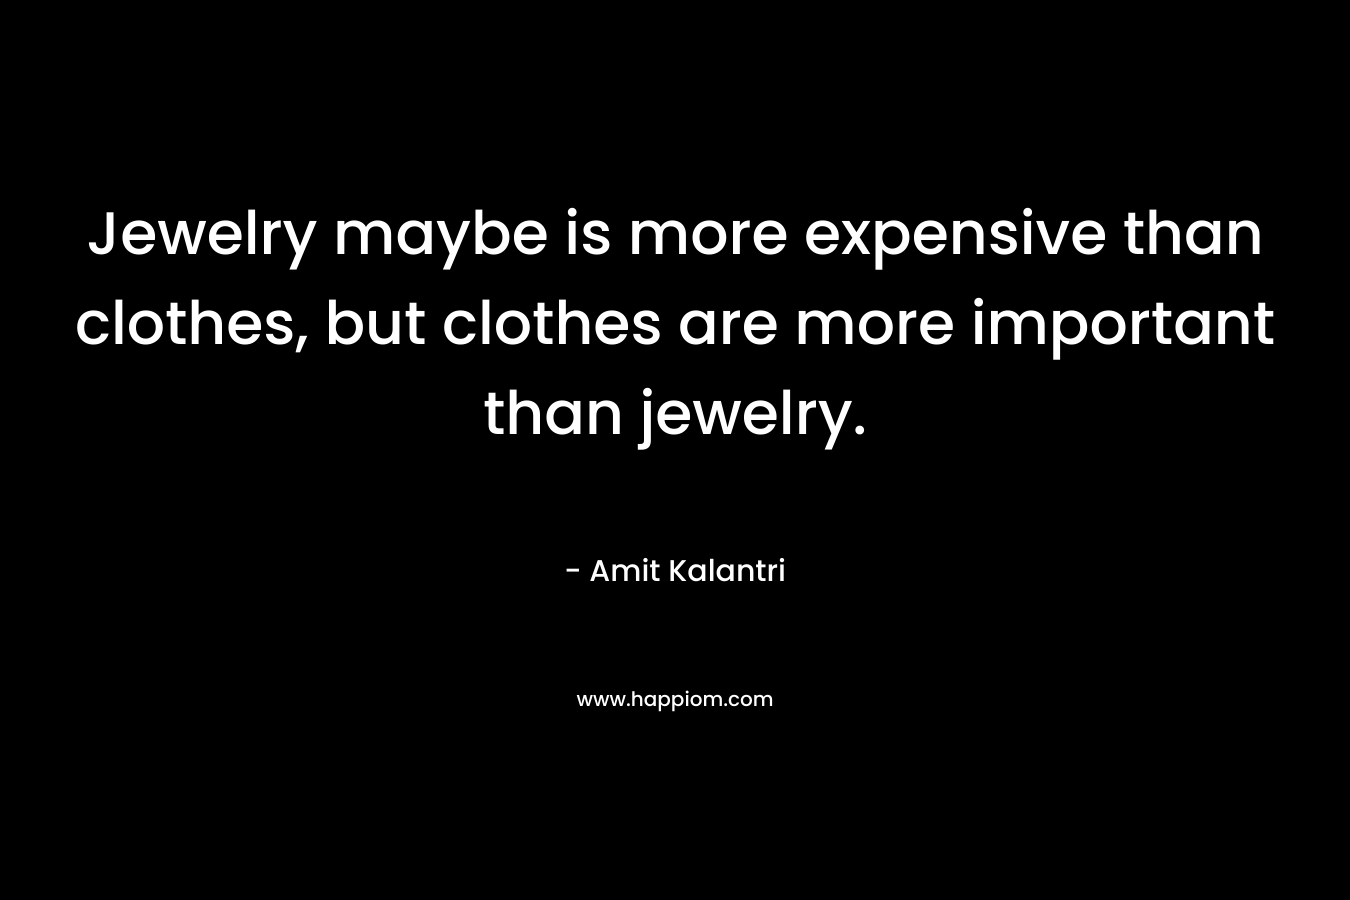 Jewelry maybe is more expensive than clothes, but clothes are more important than jewelry.